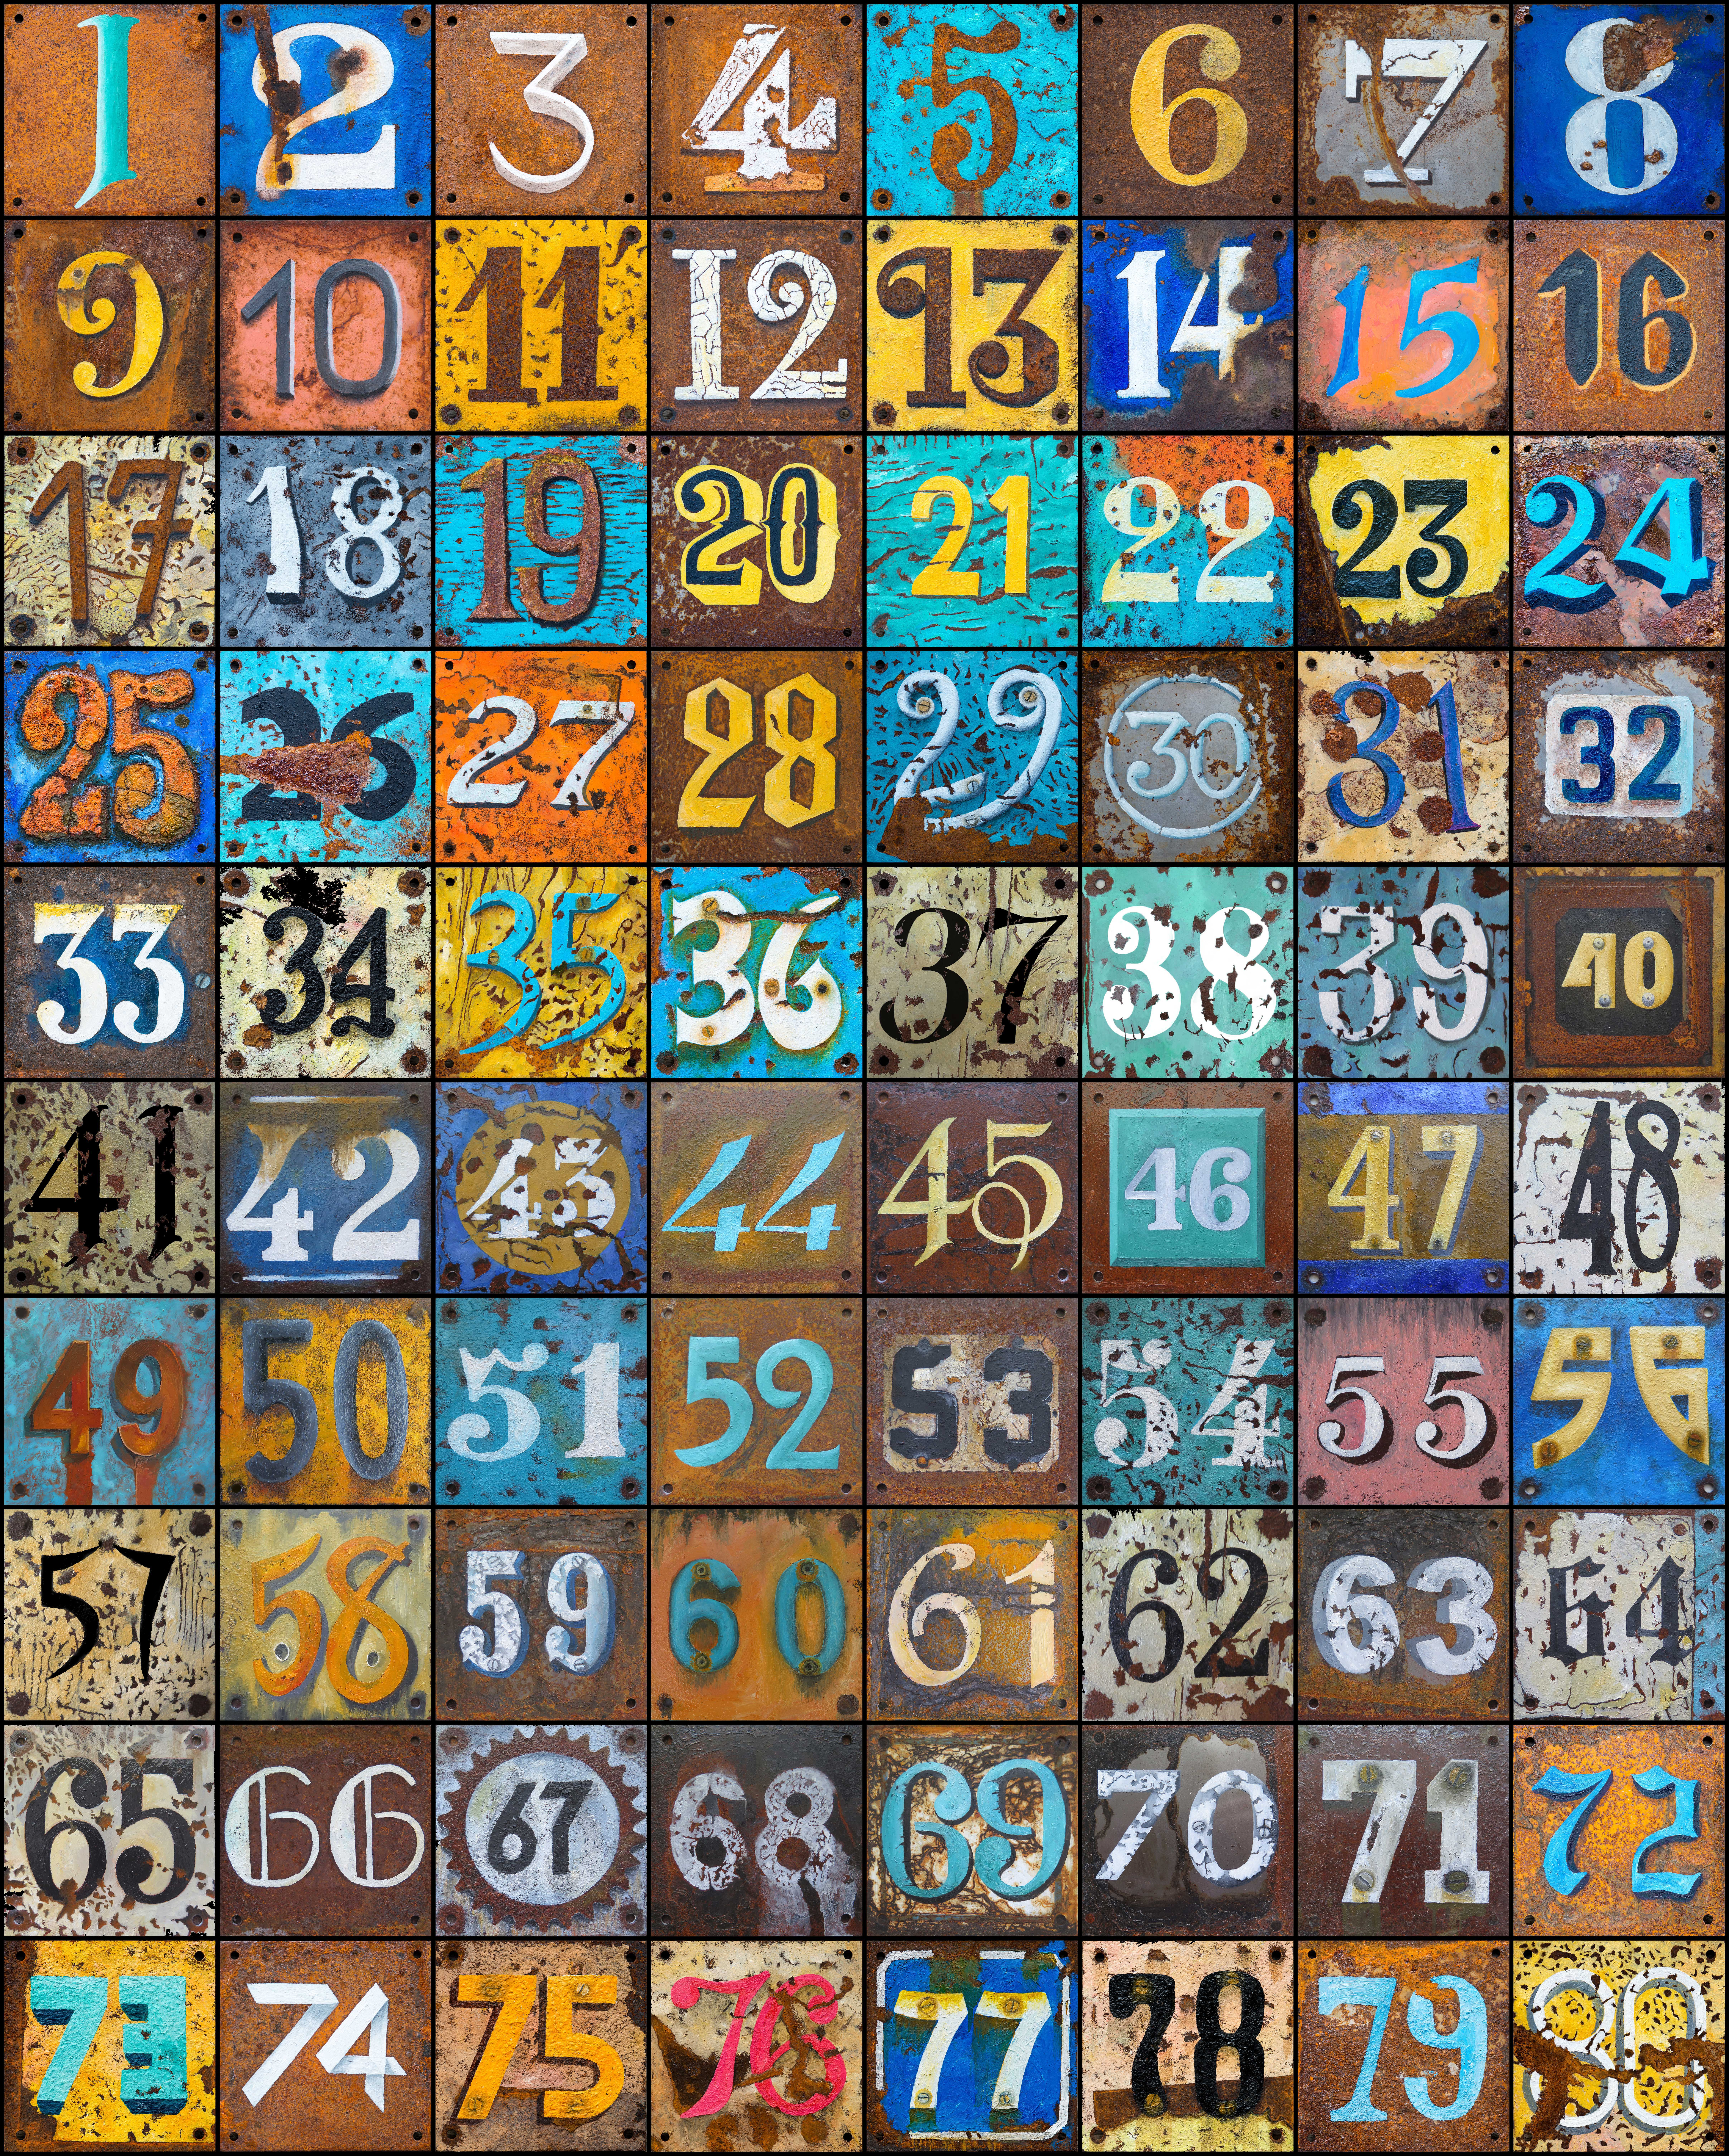 multicolored, motley, rust, texture, numbers, textures